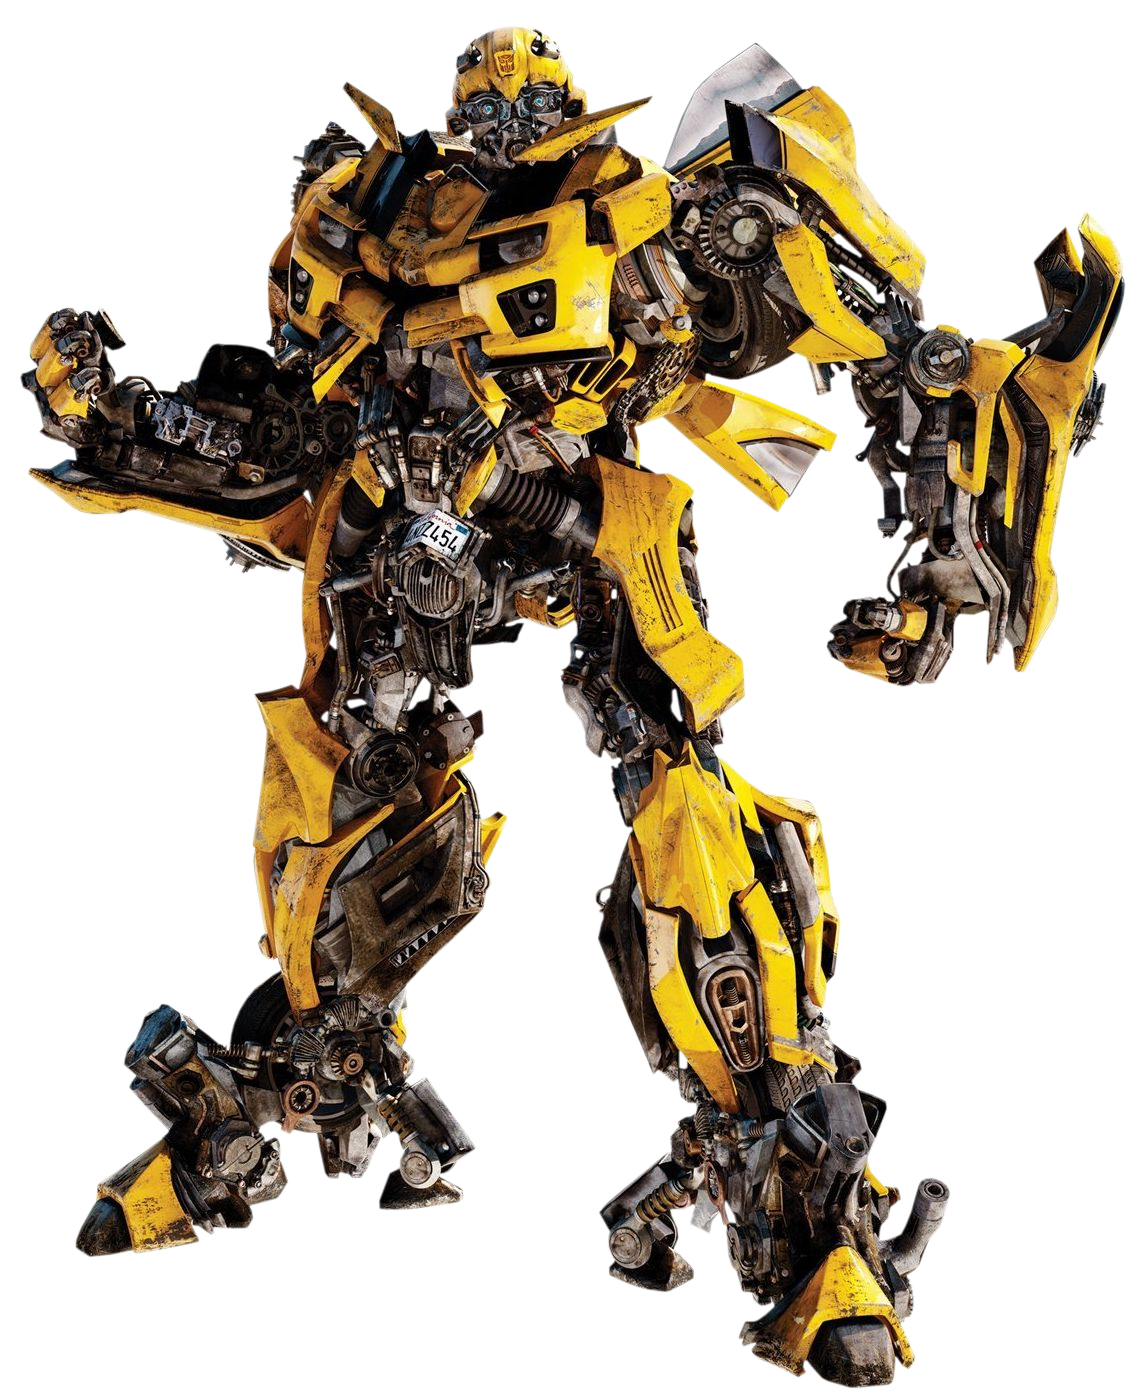 https://static.wikia.nocookie.net/universalstudios/images/9/90/Bumblebee.png/revision/latest?cb=20220722153445